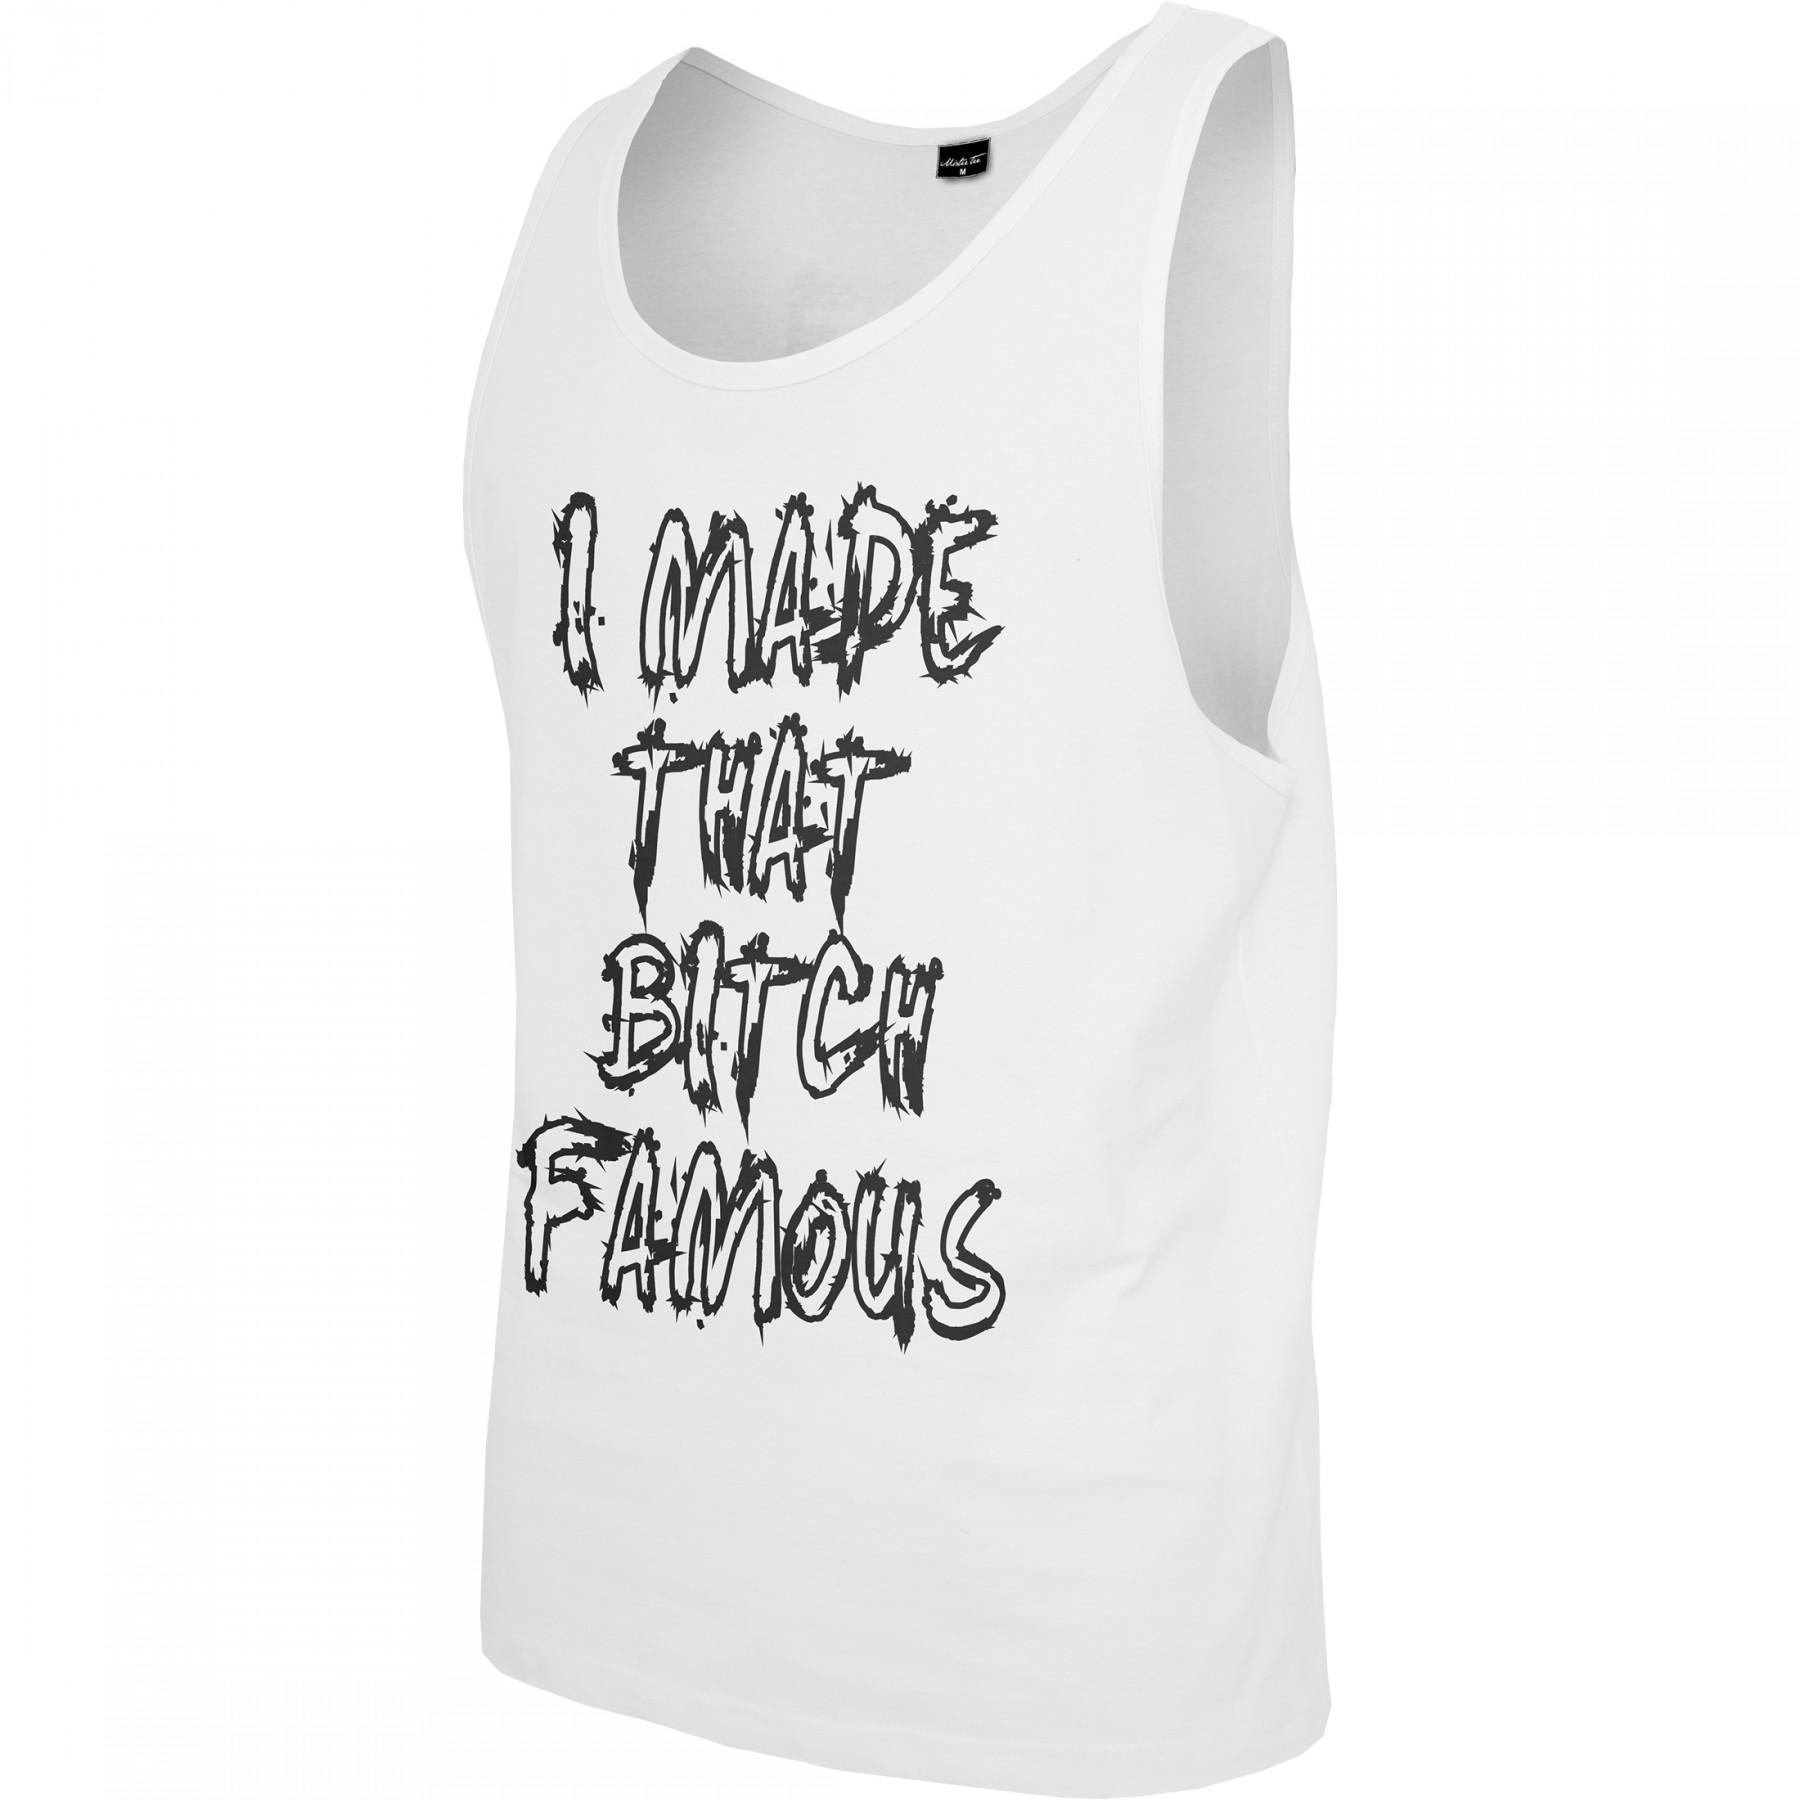 Tank top Mister Tee famous